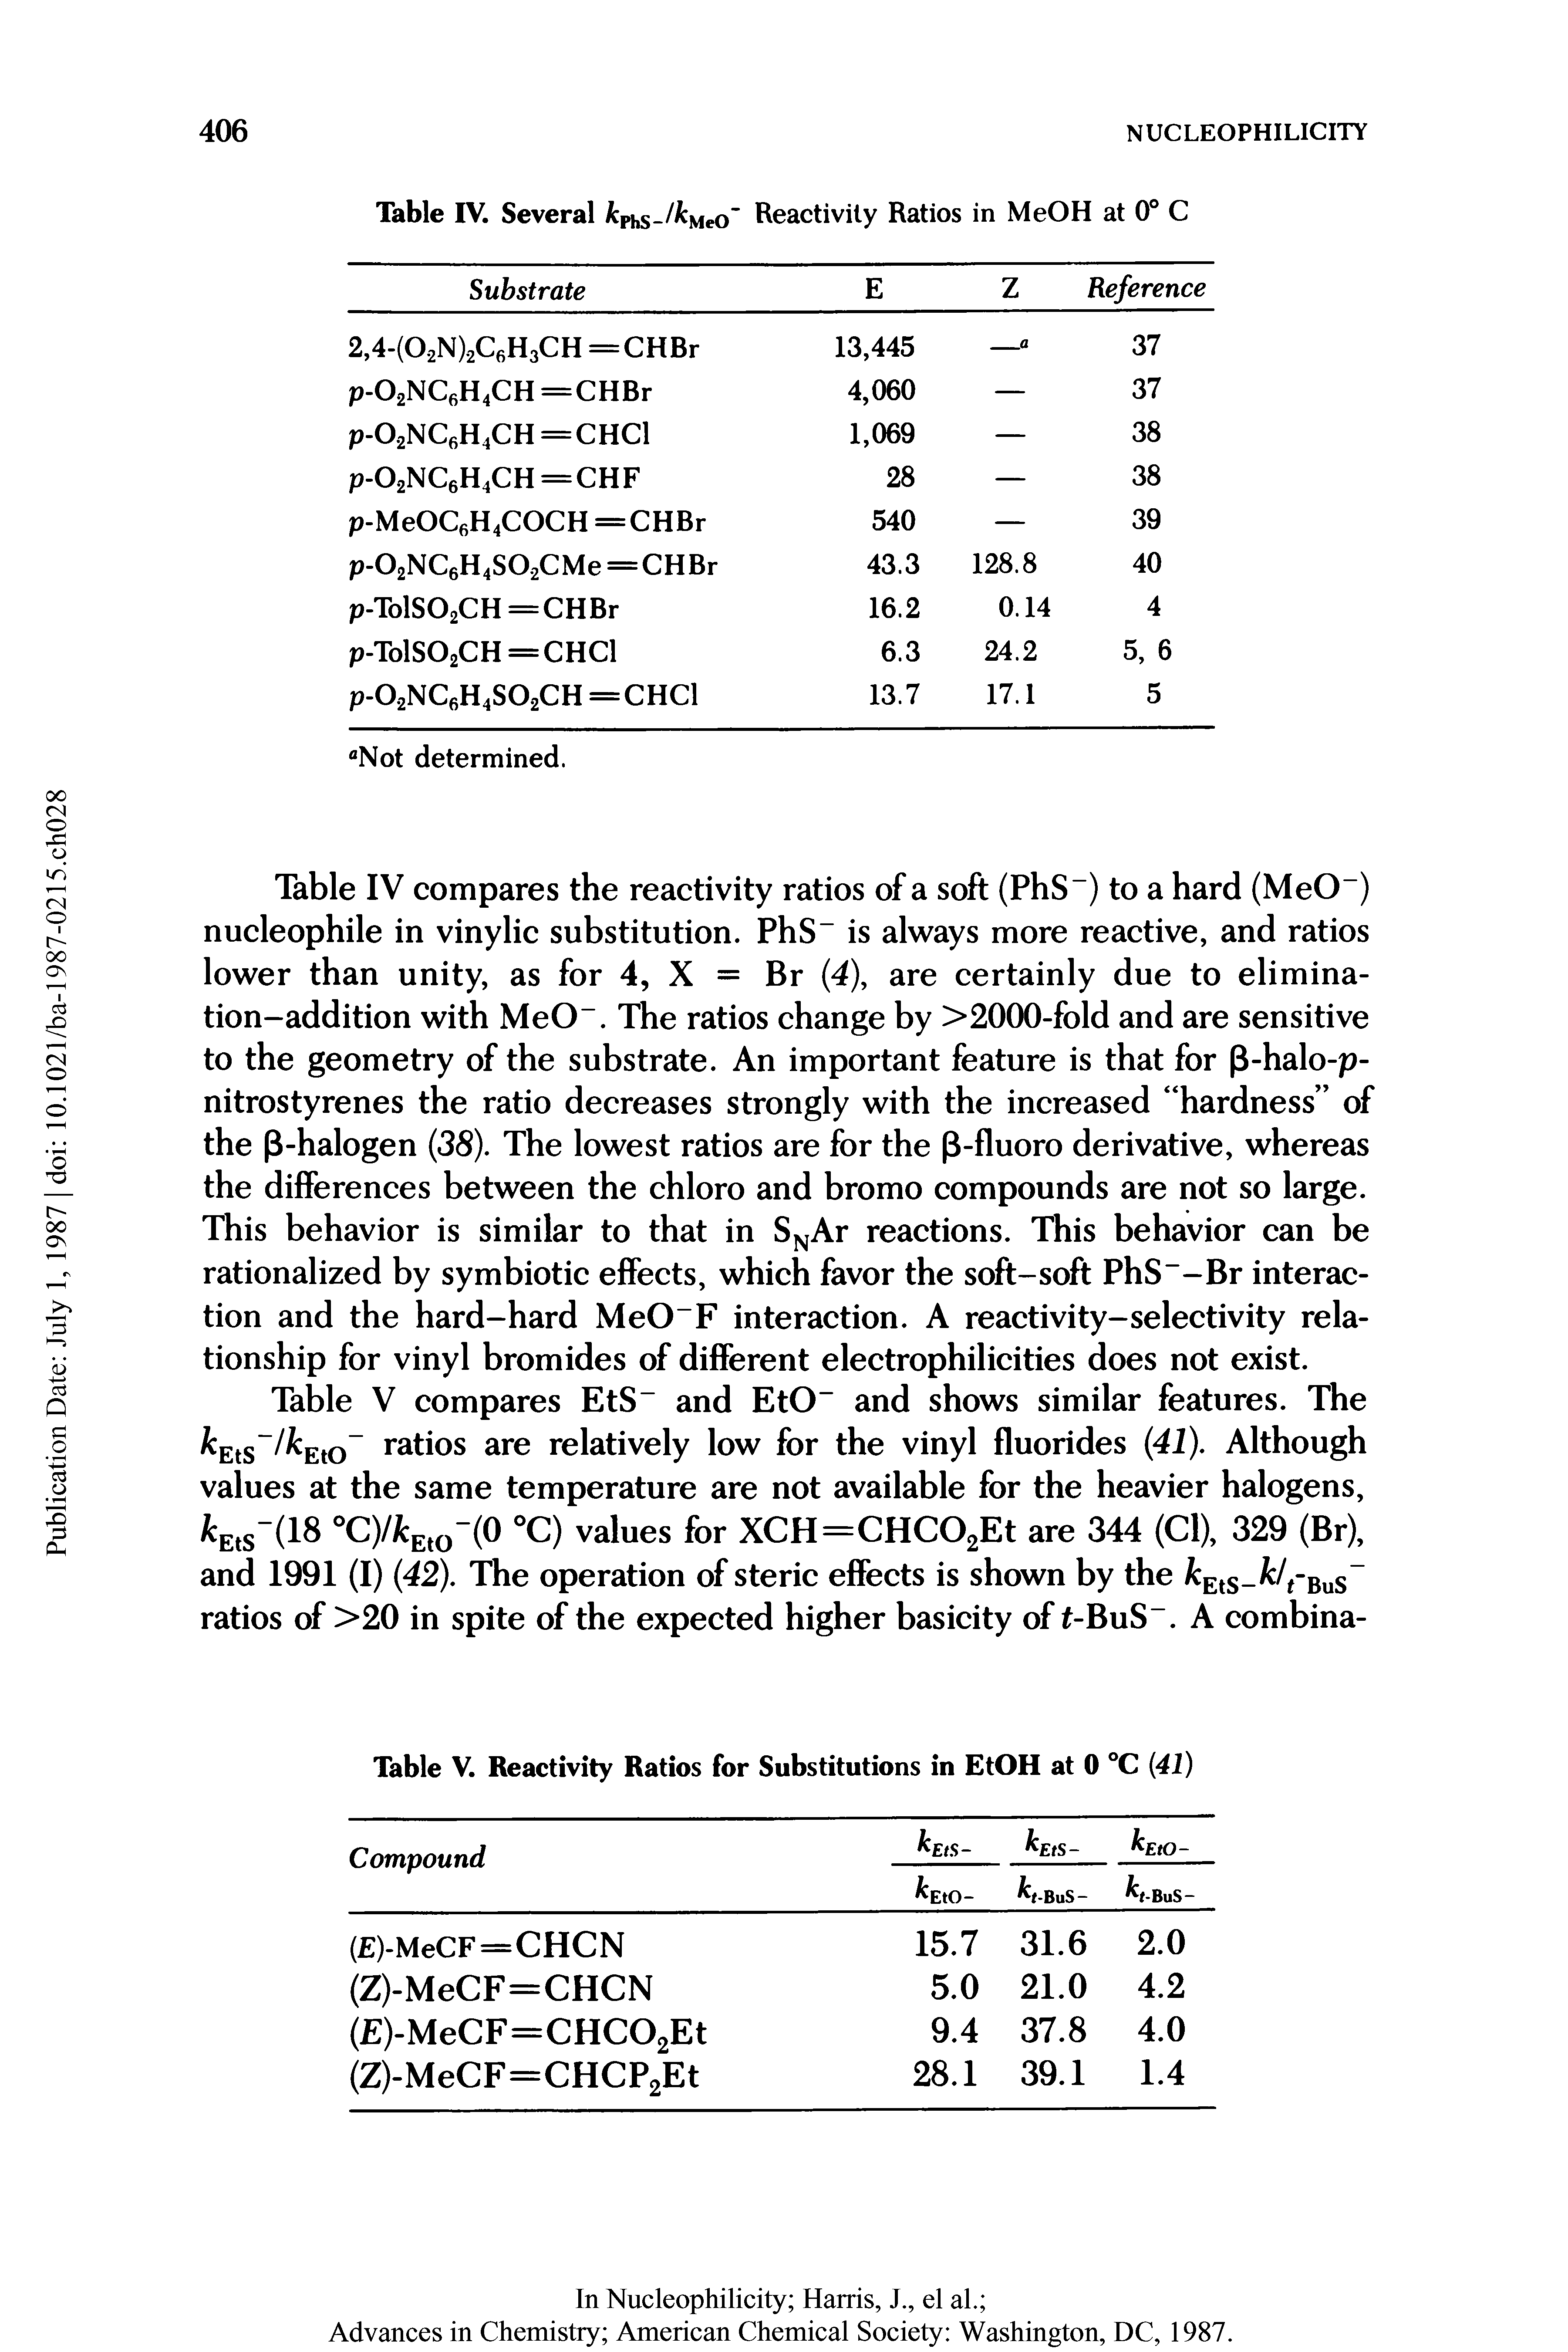 Table IV compares the reactivity ratios of a soft (PhS-) to a hard (MeO-) nucleophile in vinylic substitution. PhS is always more reactive, and ratios lower than unity, as for 4, X = Br (4), are certainly due to elimination-addition with MeO . The ratios change by >2000-fold and are sensitive to the geometry of the substrate. An important feature is that for (3-halo-p-nitrostyrenes the ratio decreases strongly with the increased hardness of the (3-halogen (38). The lowest ratios are for the (3-fluoro derivative, whereas the differences between the chloro and bromo compounds are not so large. This behavior is similar to that in SNAr reactions. This behavior can be rationalized by symbiotic effects, which favor the soft-soft PhS--Br interaction and the hard-hard MeO-F interaction. A reactivity-selectivity relationship for vinyl bromides of different electrophilicities does not exist.